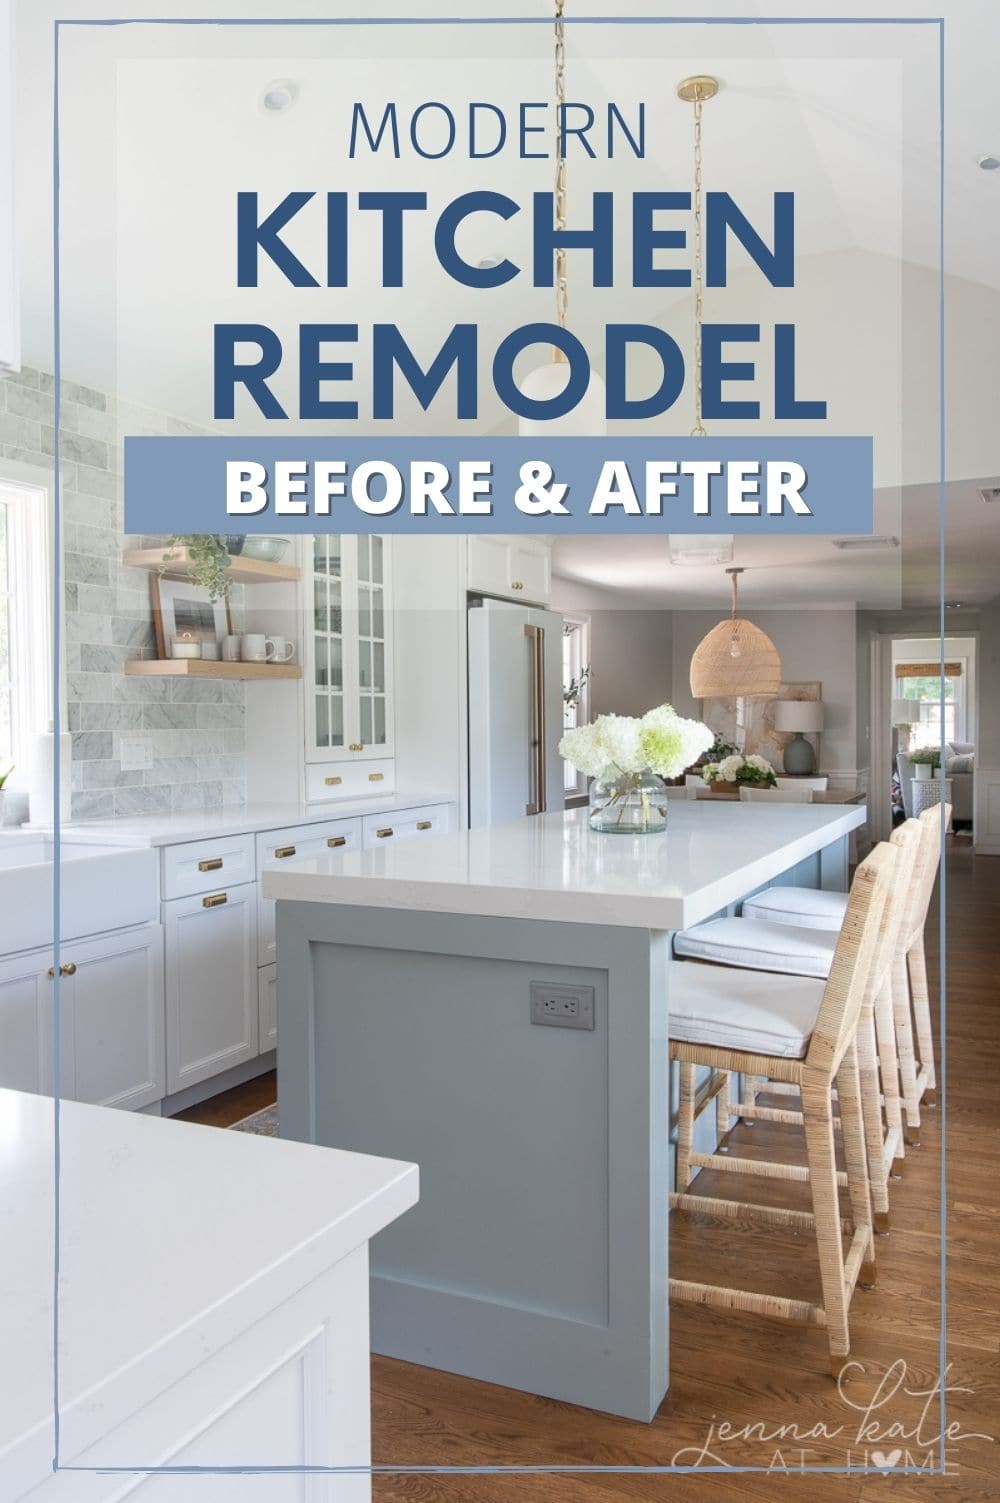 My Kitchen Remodel Reveal   Jenna Kate at Home